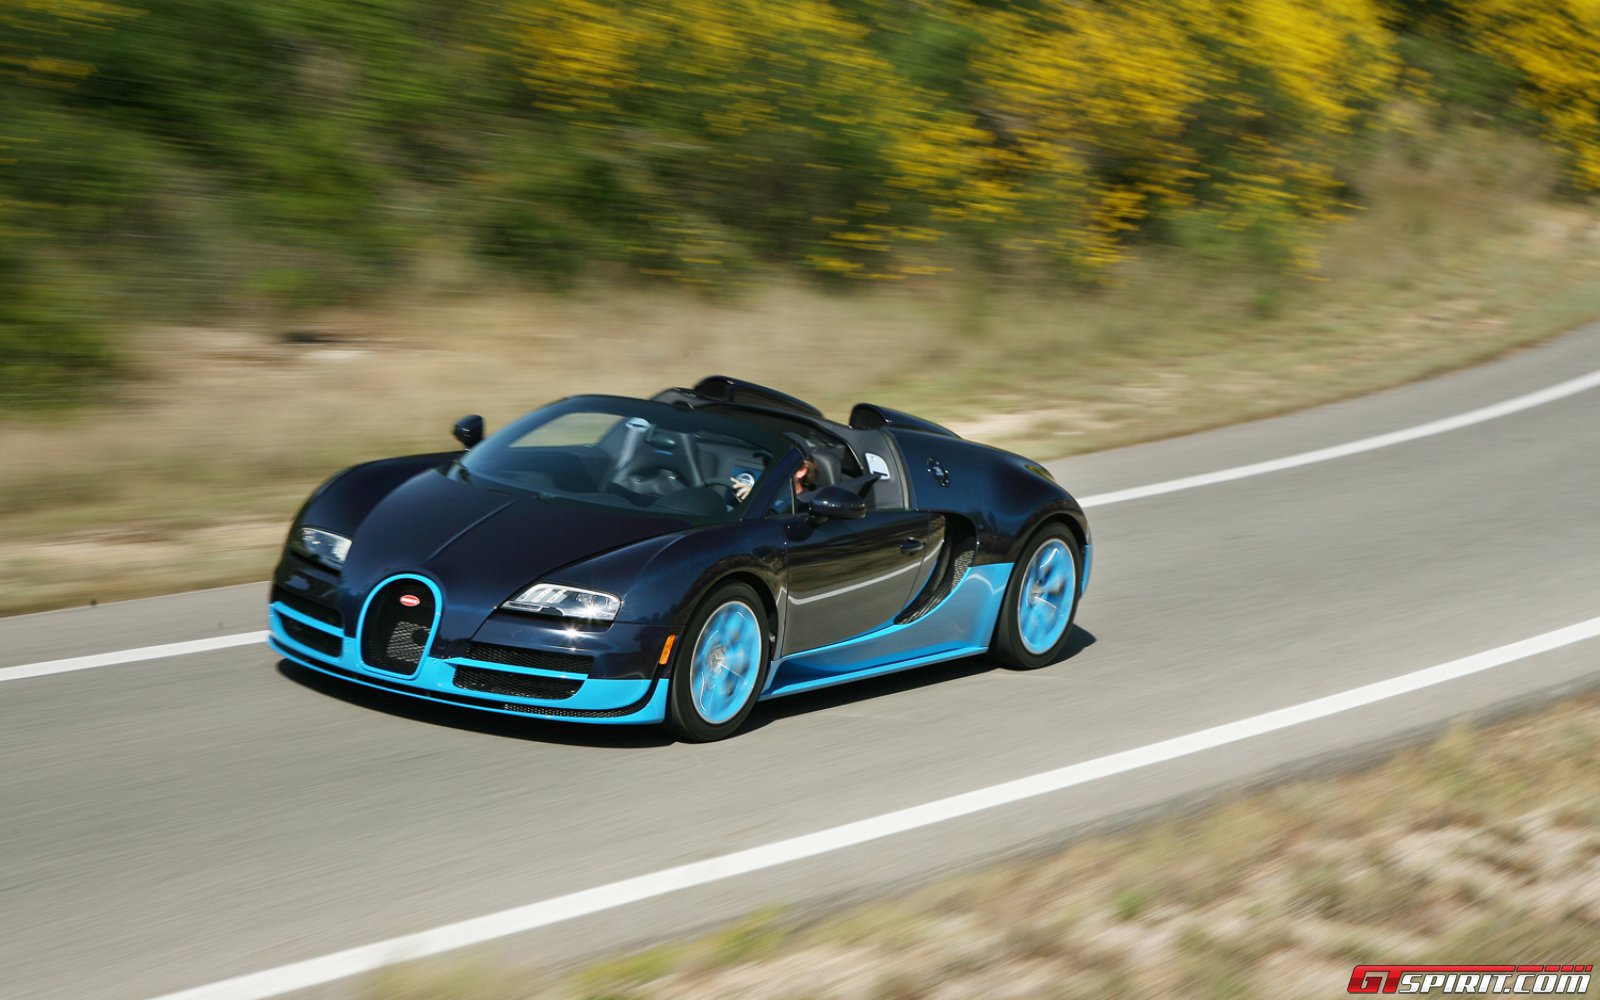 Video: Bugatti Veyron Gets World's Most Expensive Aftermarket Exhaust